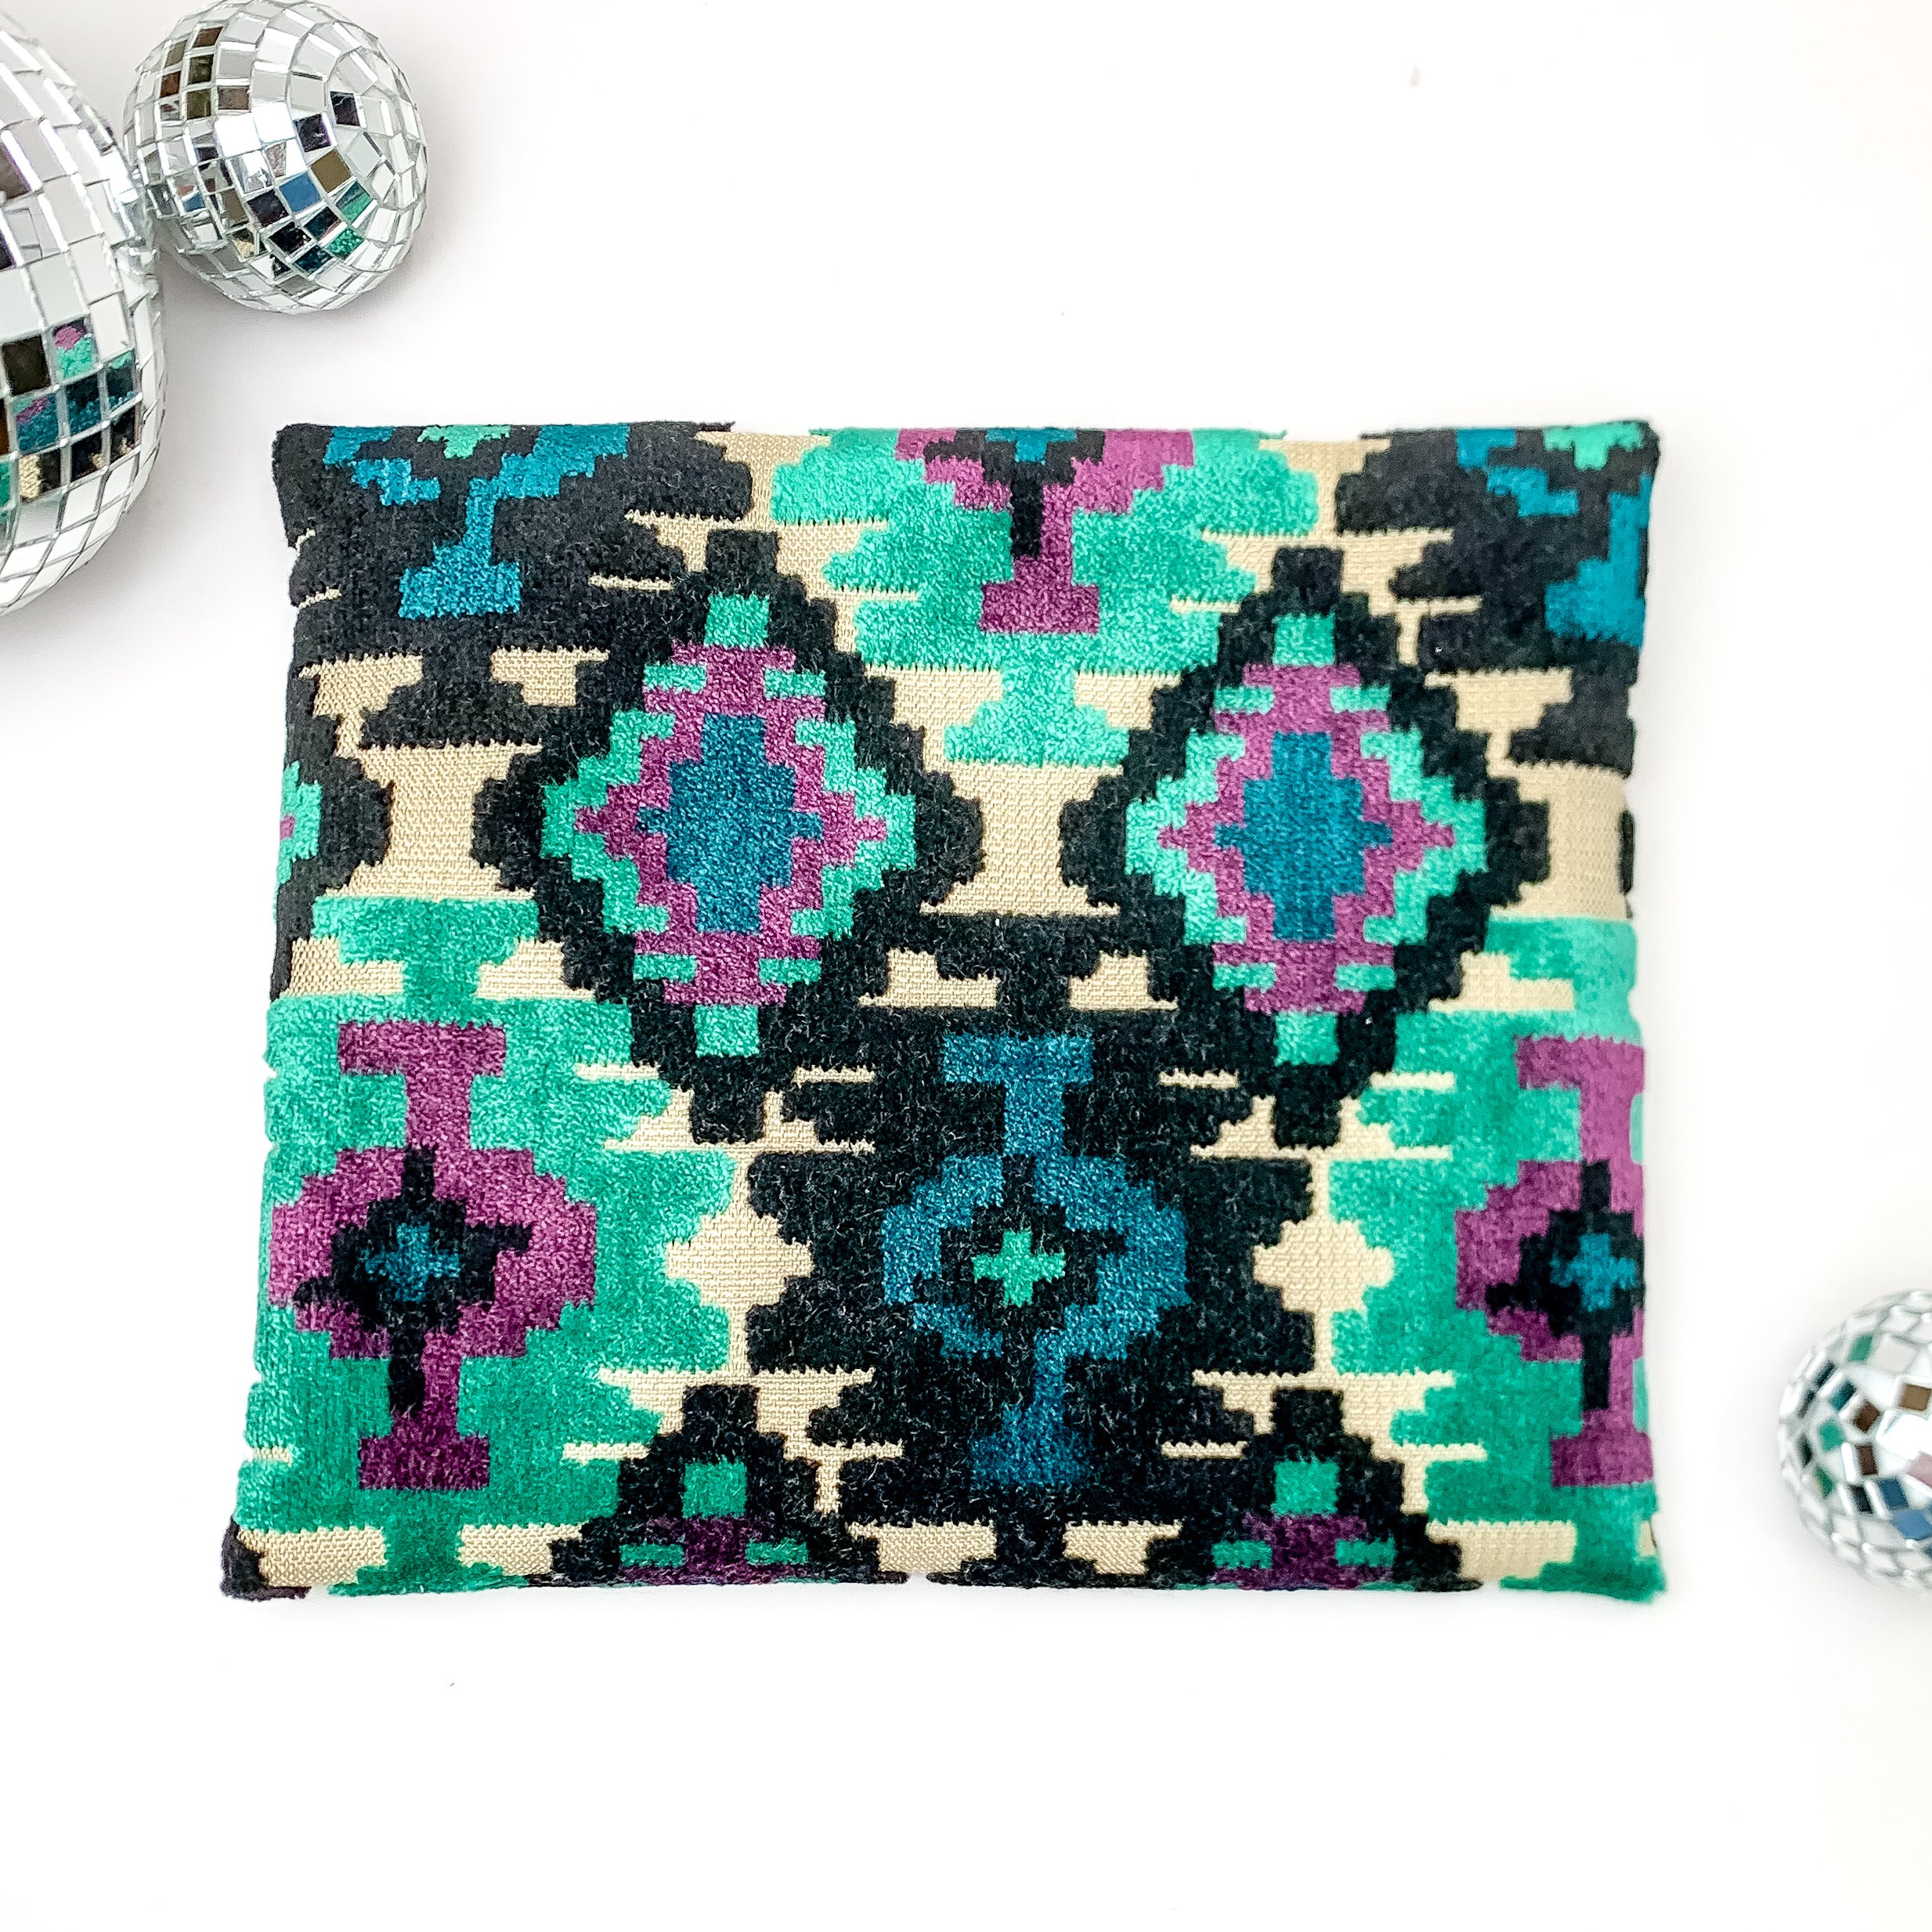 Makeup Junkie | Small Midnight Aztec Lay Flat Bag in Turquoise Green and Black Mix - Giddy Up Glamour Boutique